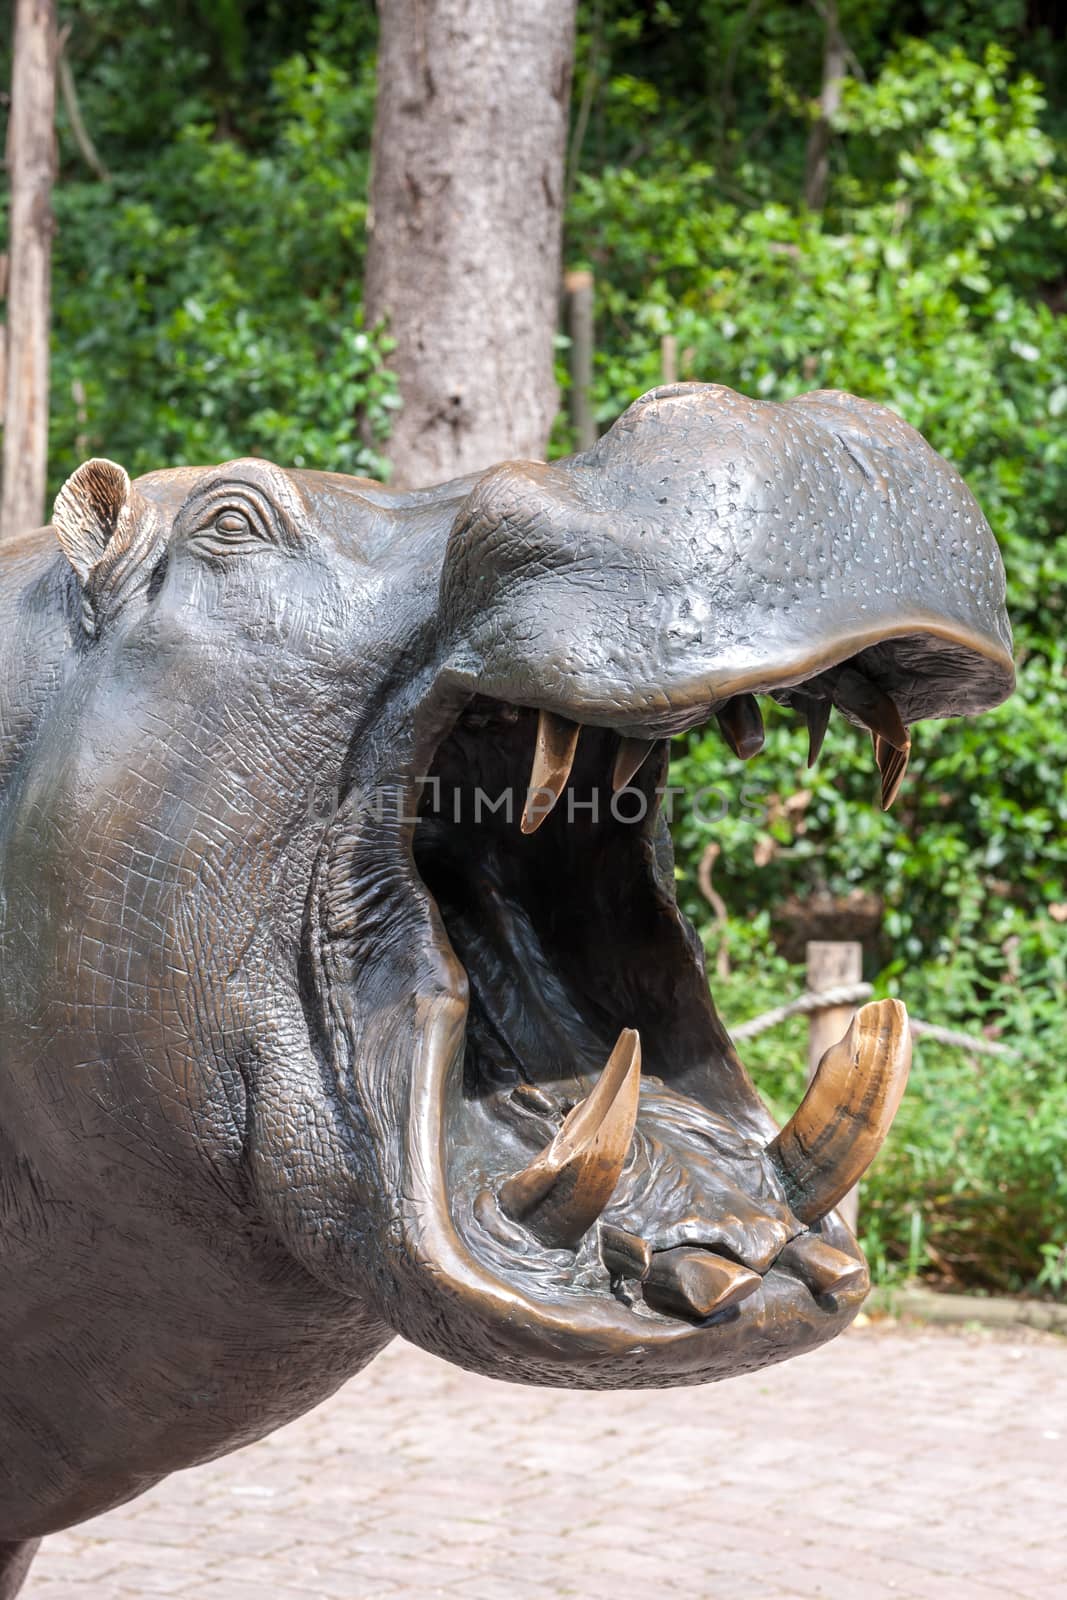 Hippopotamus showing huge jaw and teeth by master1305